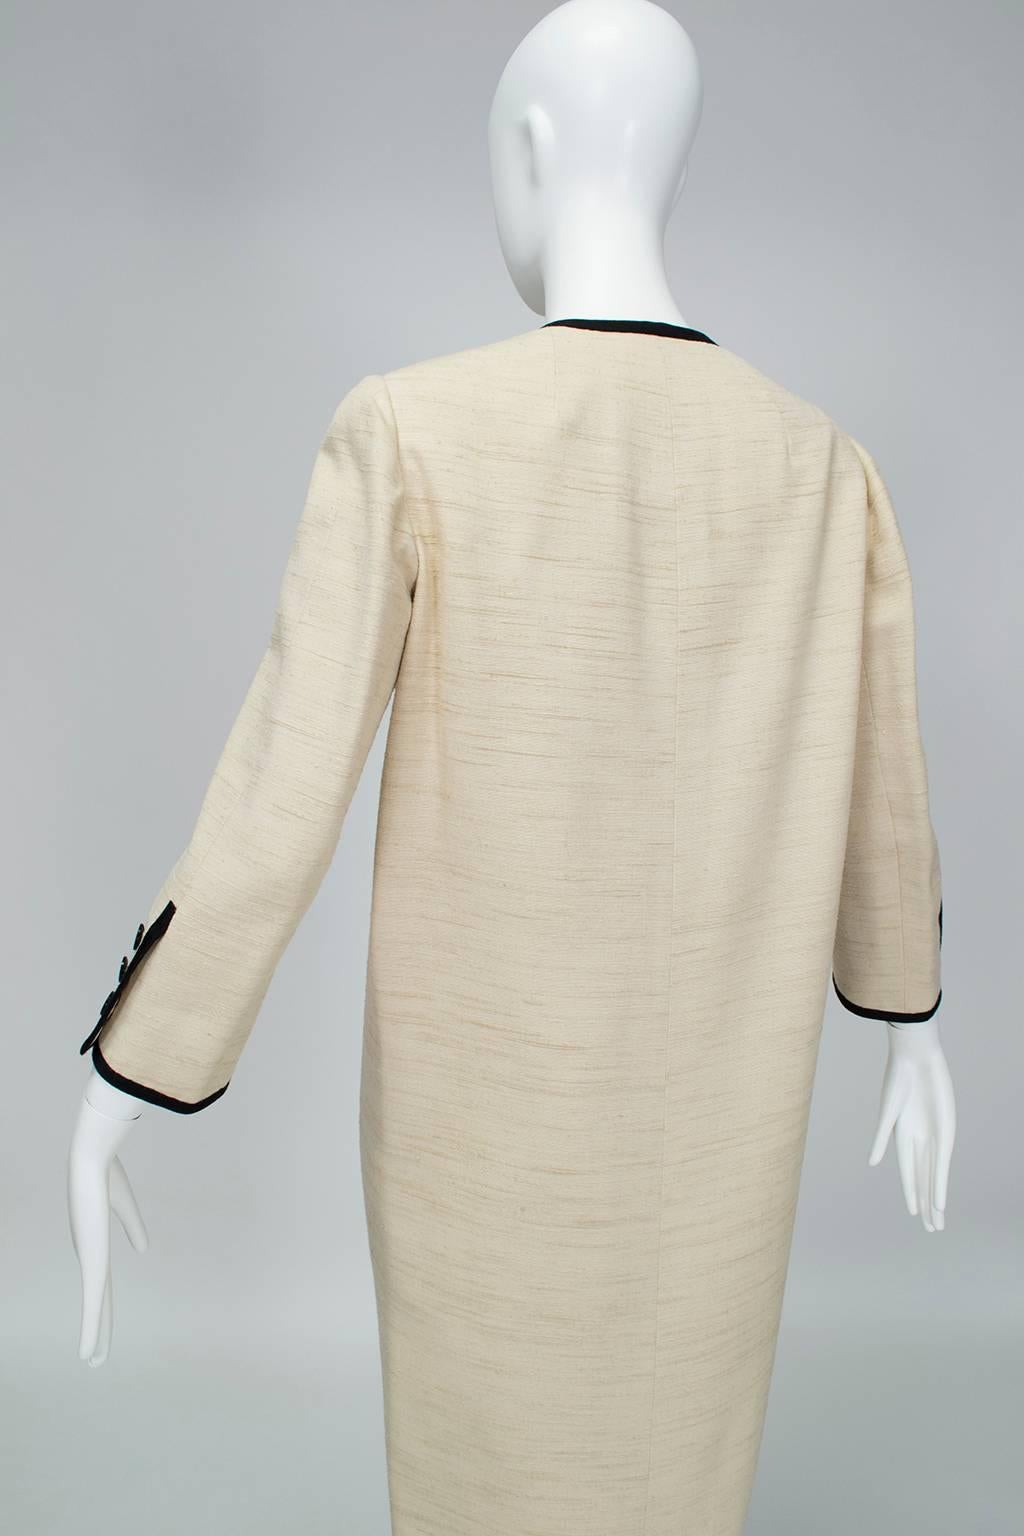 Beige Traina-Norell Mod Ivory ¾ Coat with Contrast Piping - Medium, 1950s For Sale